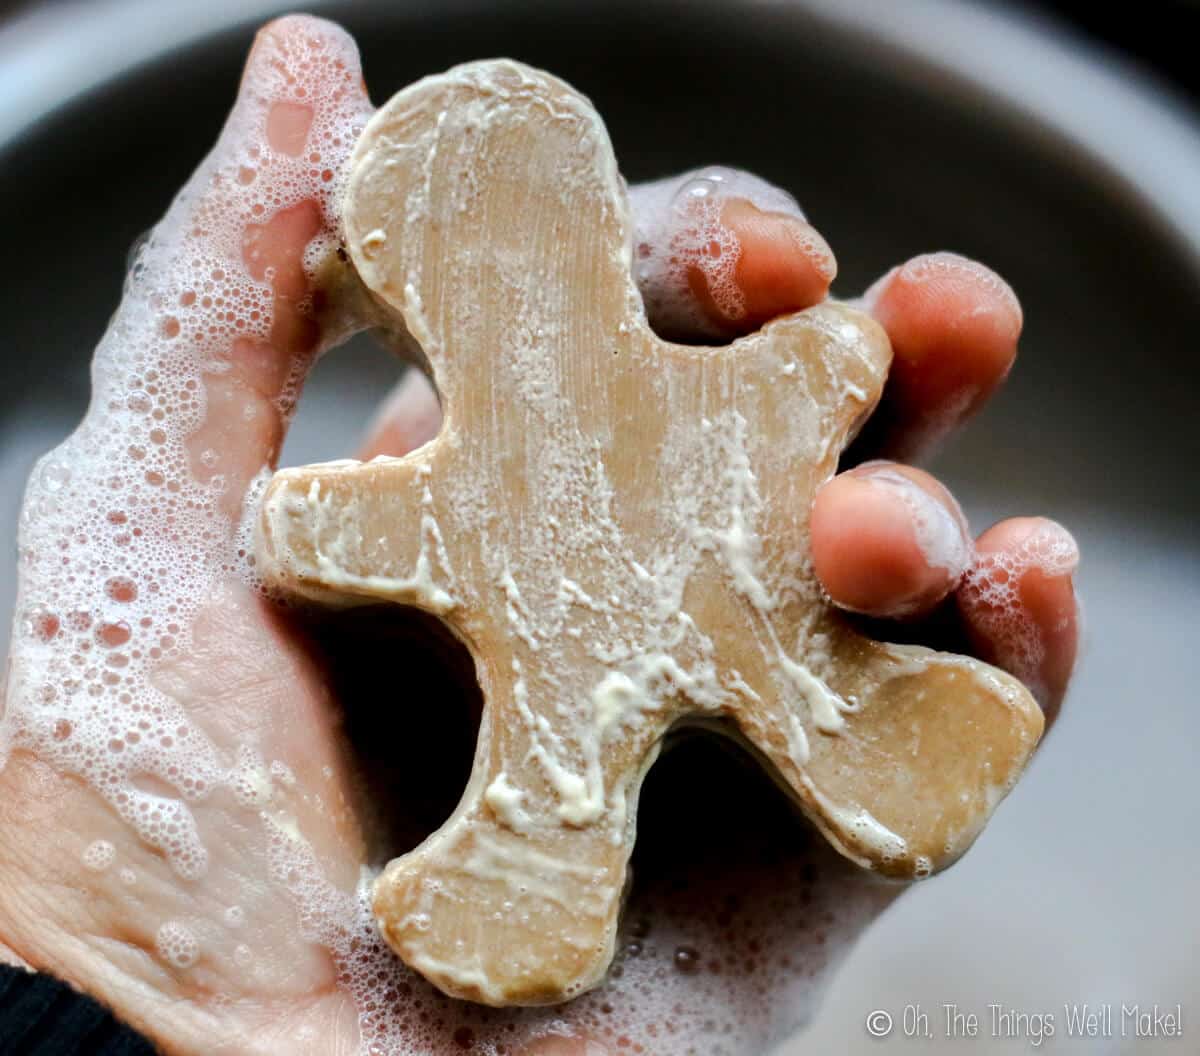 Lathering up homemade gingerbread soap that is in the shape of a gingerbread man.